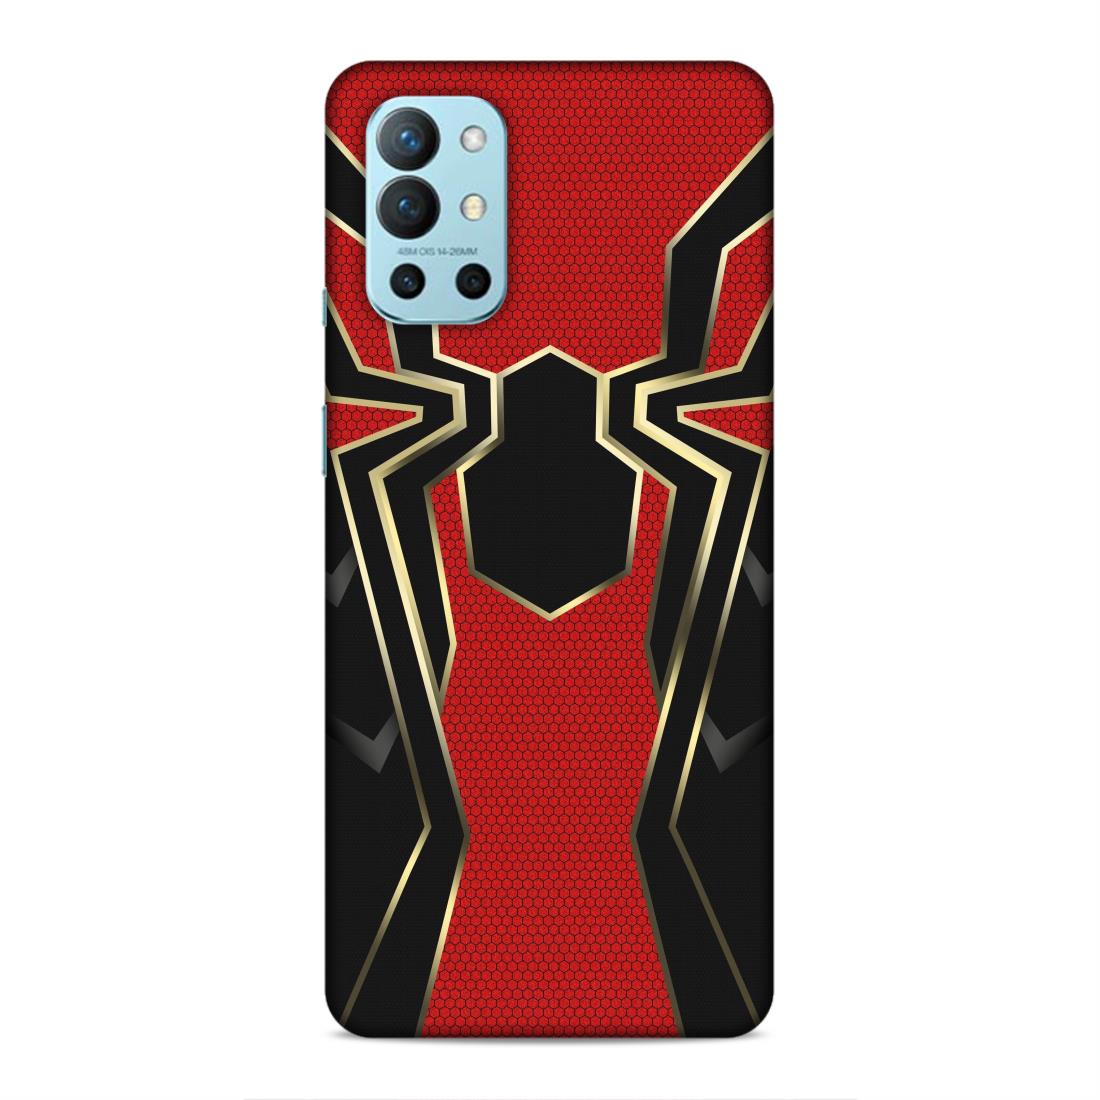 Spiderman Shuit Hard Back Case For OnePlus 8T / 9R